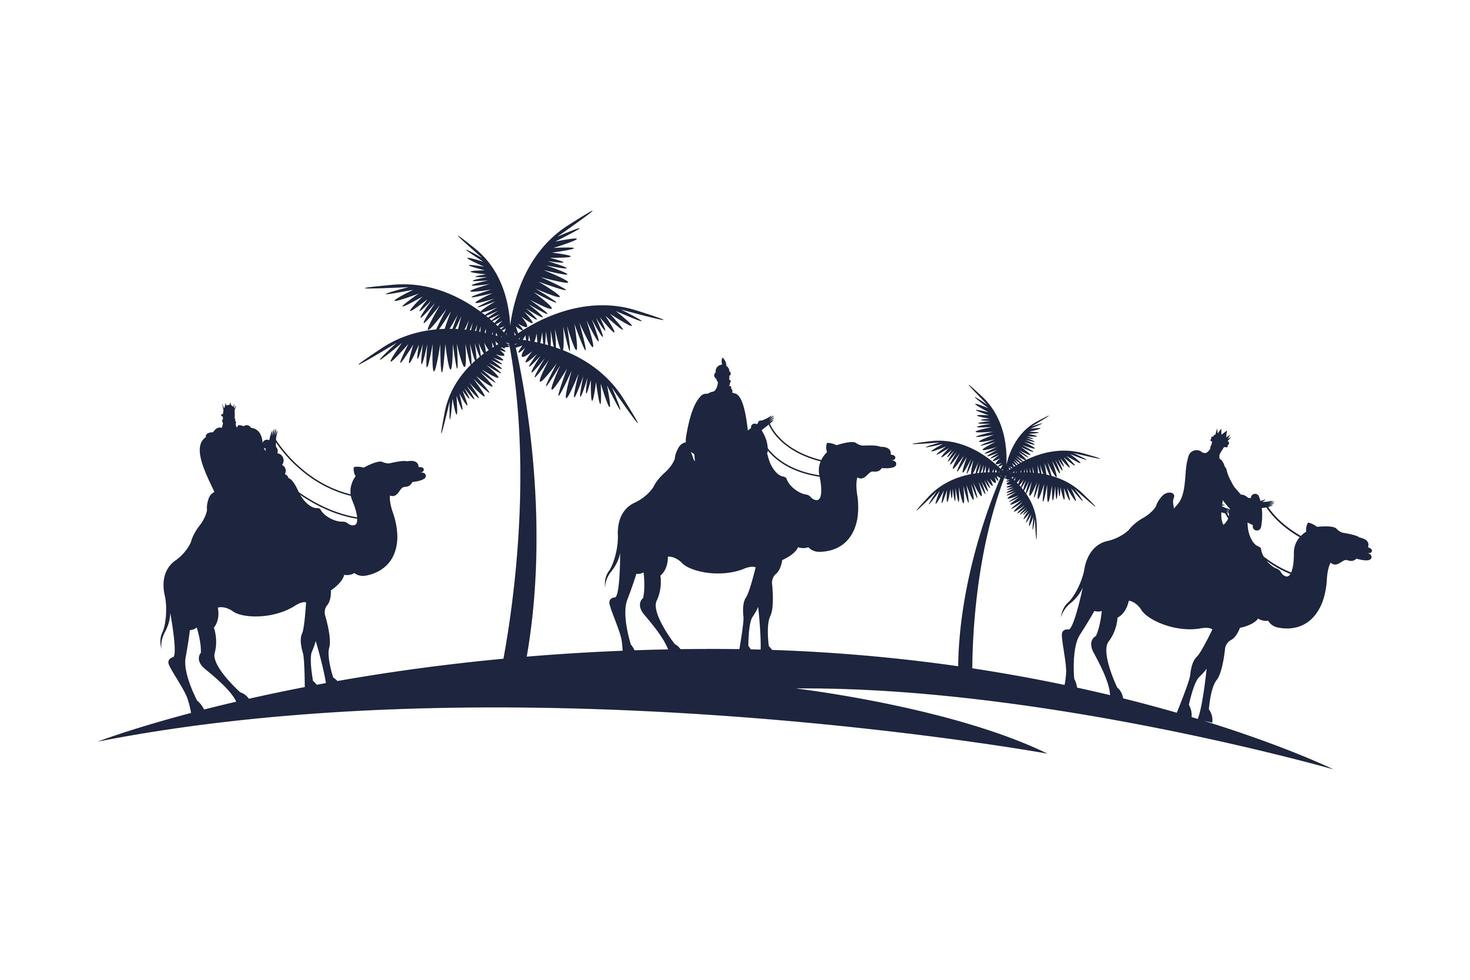 wise men group in camels and palms mangers characters silhouette vector